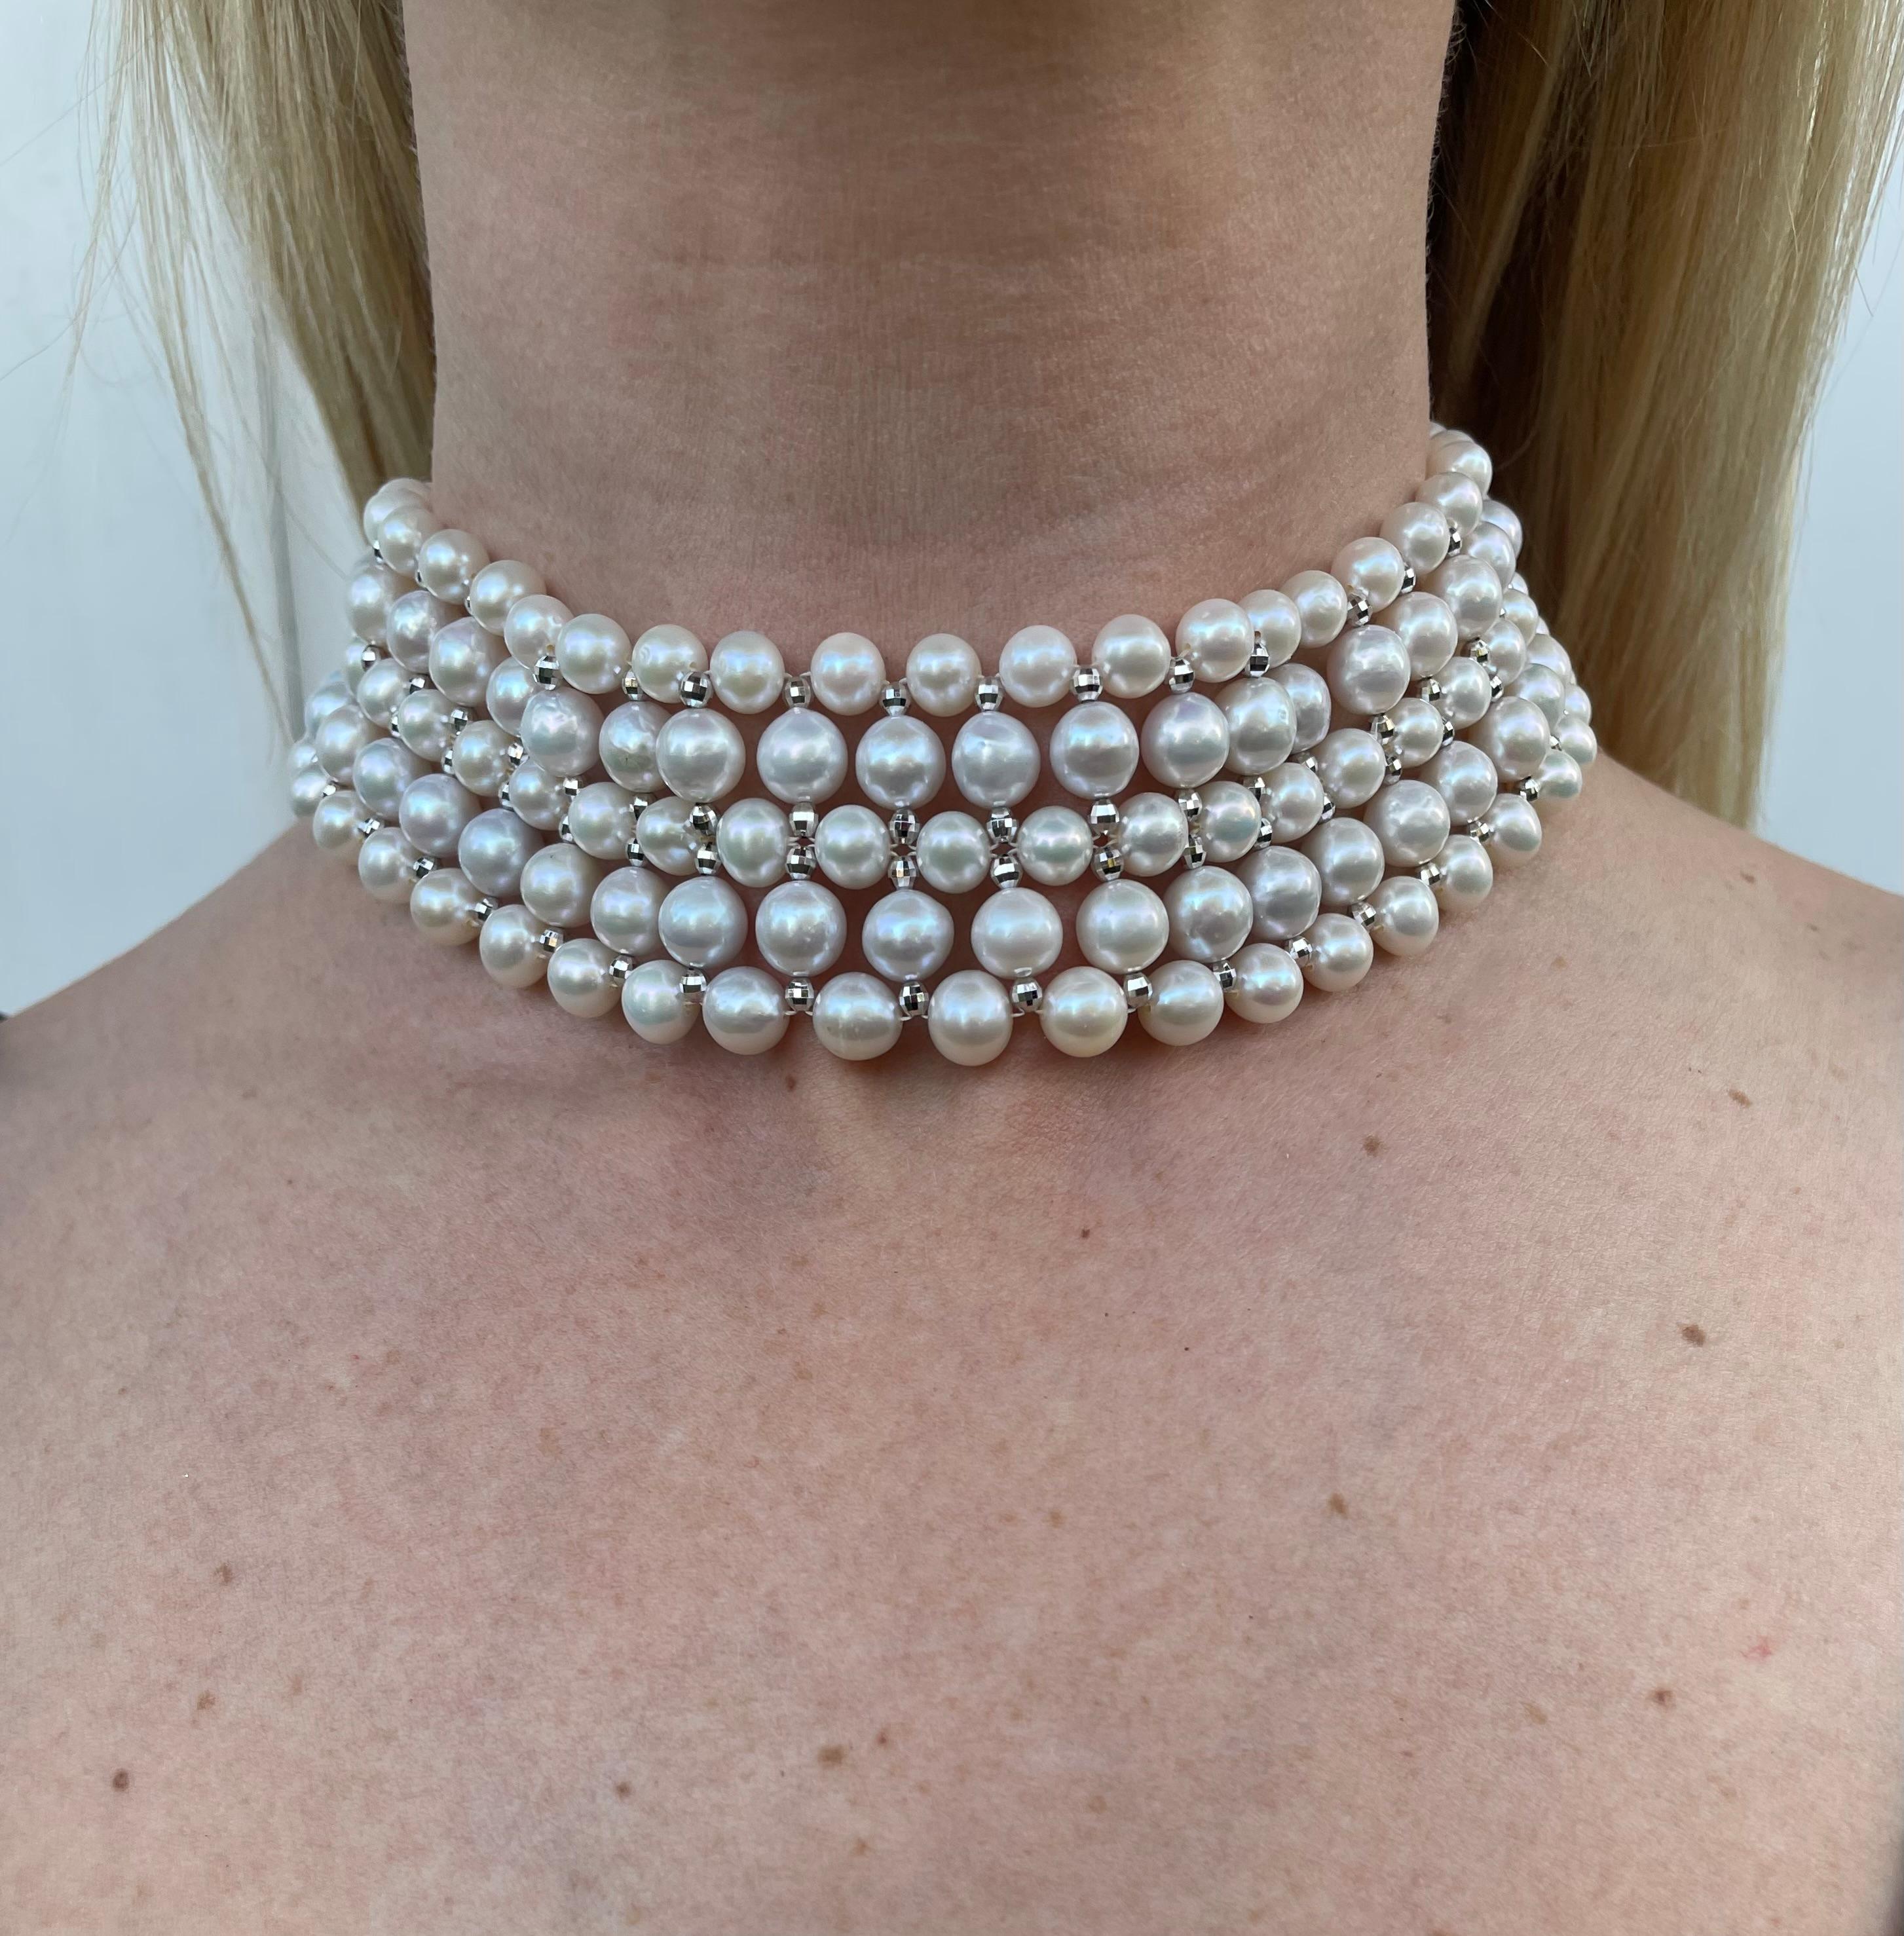 Artisan Marina J. Woven Pearl Choker with Gold Plated Faceted Beads & Decorative Clasp For Sale